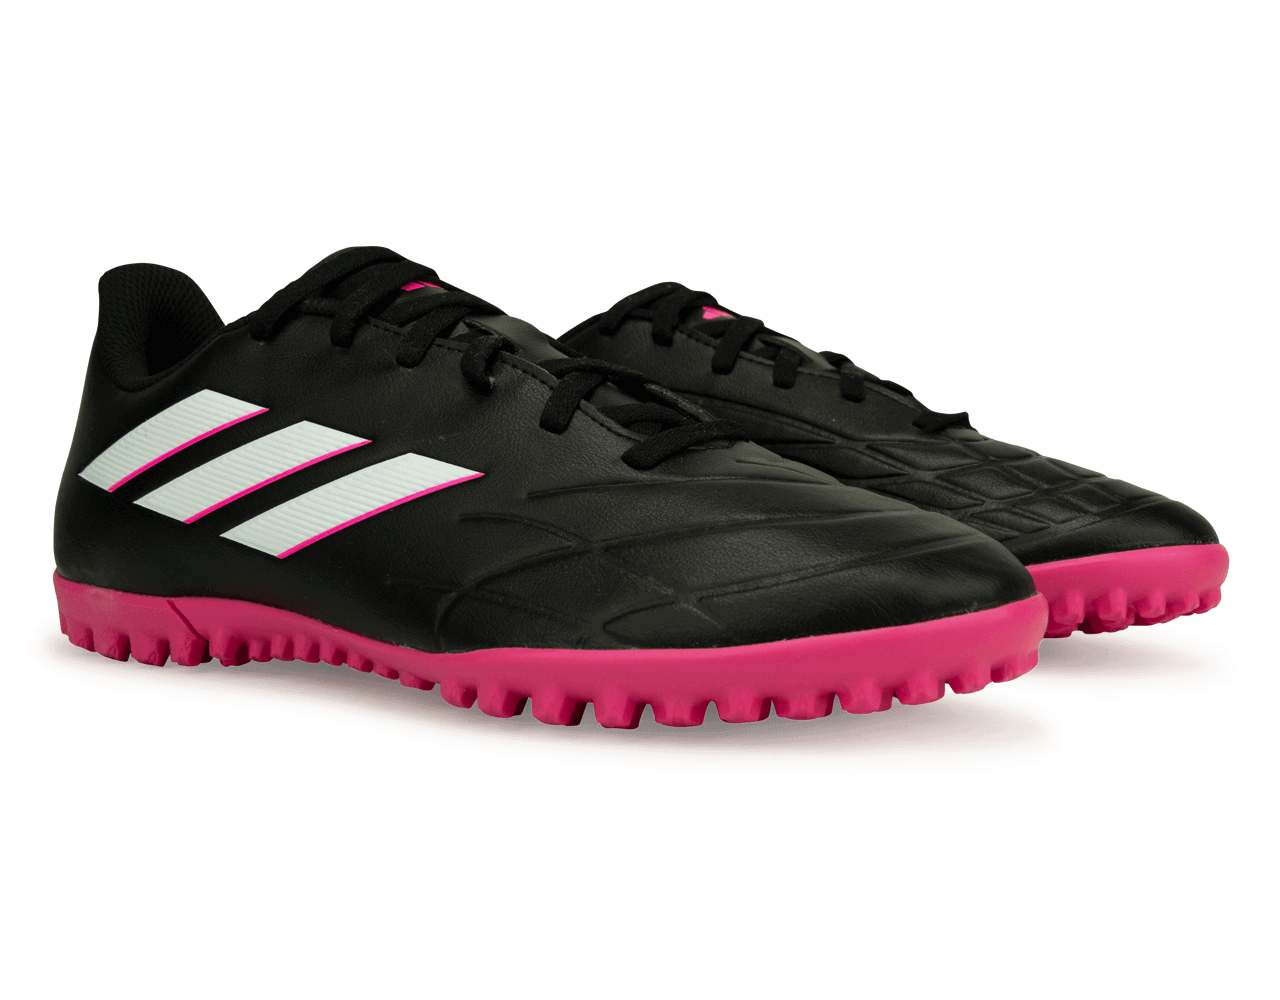 adidas Men's Copa Pure.4 TF Black/Pink Together